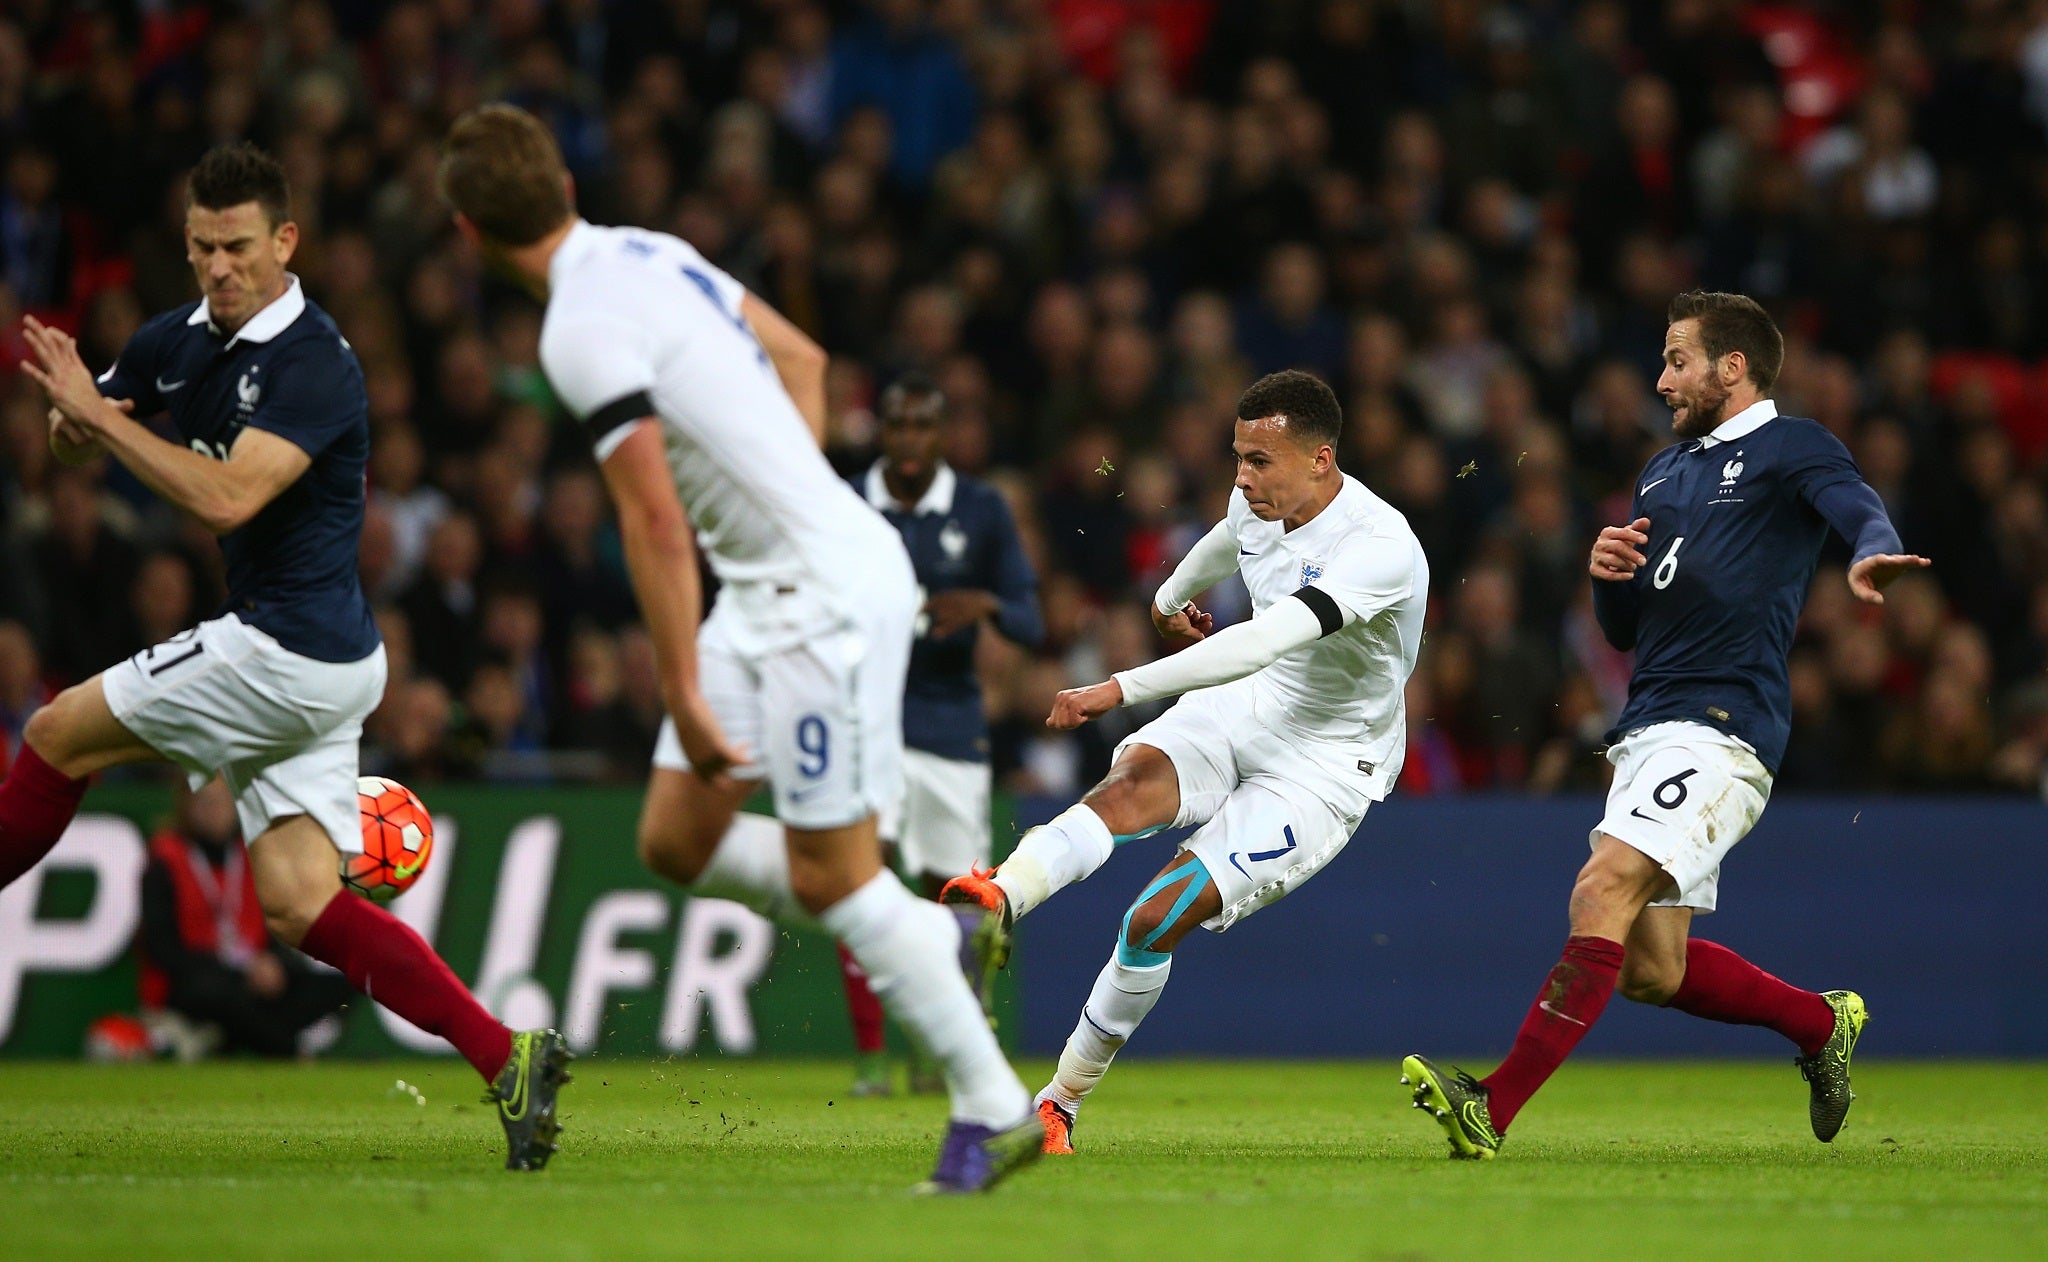 Dele Alli shoots to score the first goal for England against France